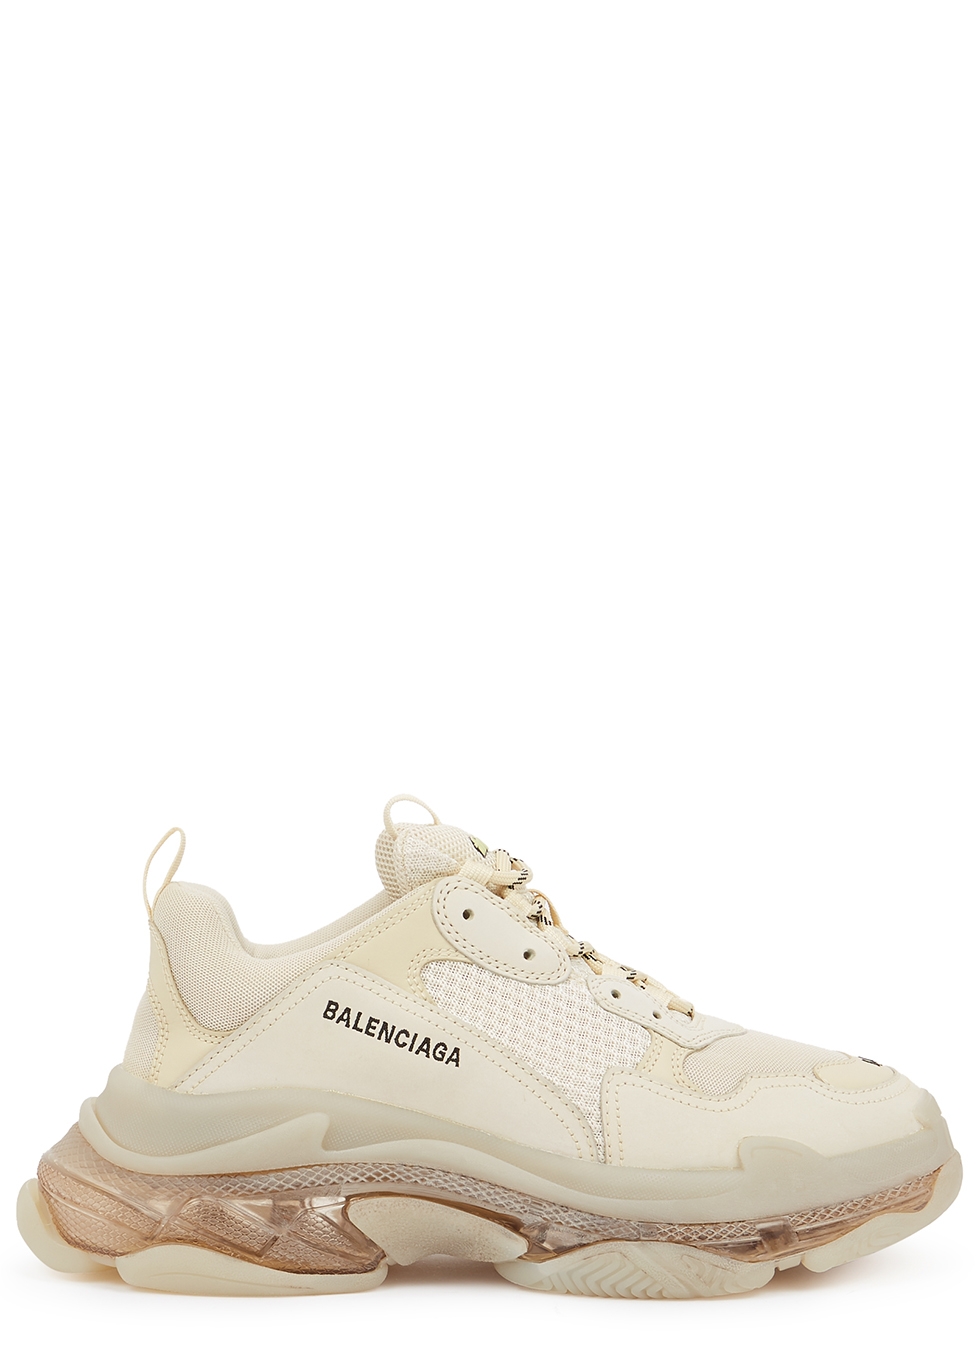 Latest Balenciaga Triple S X Speed Runner Trainer sneakers